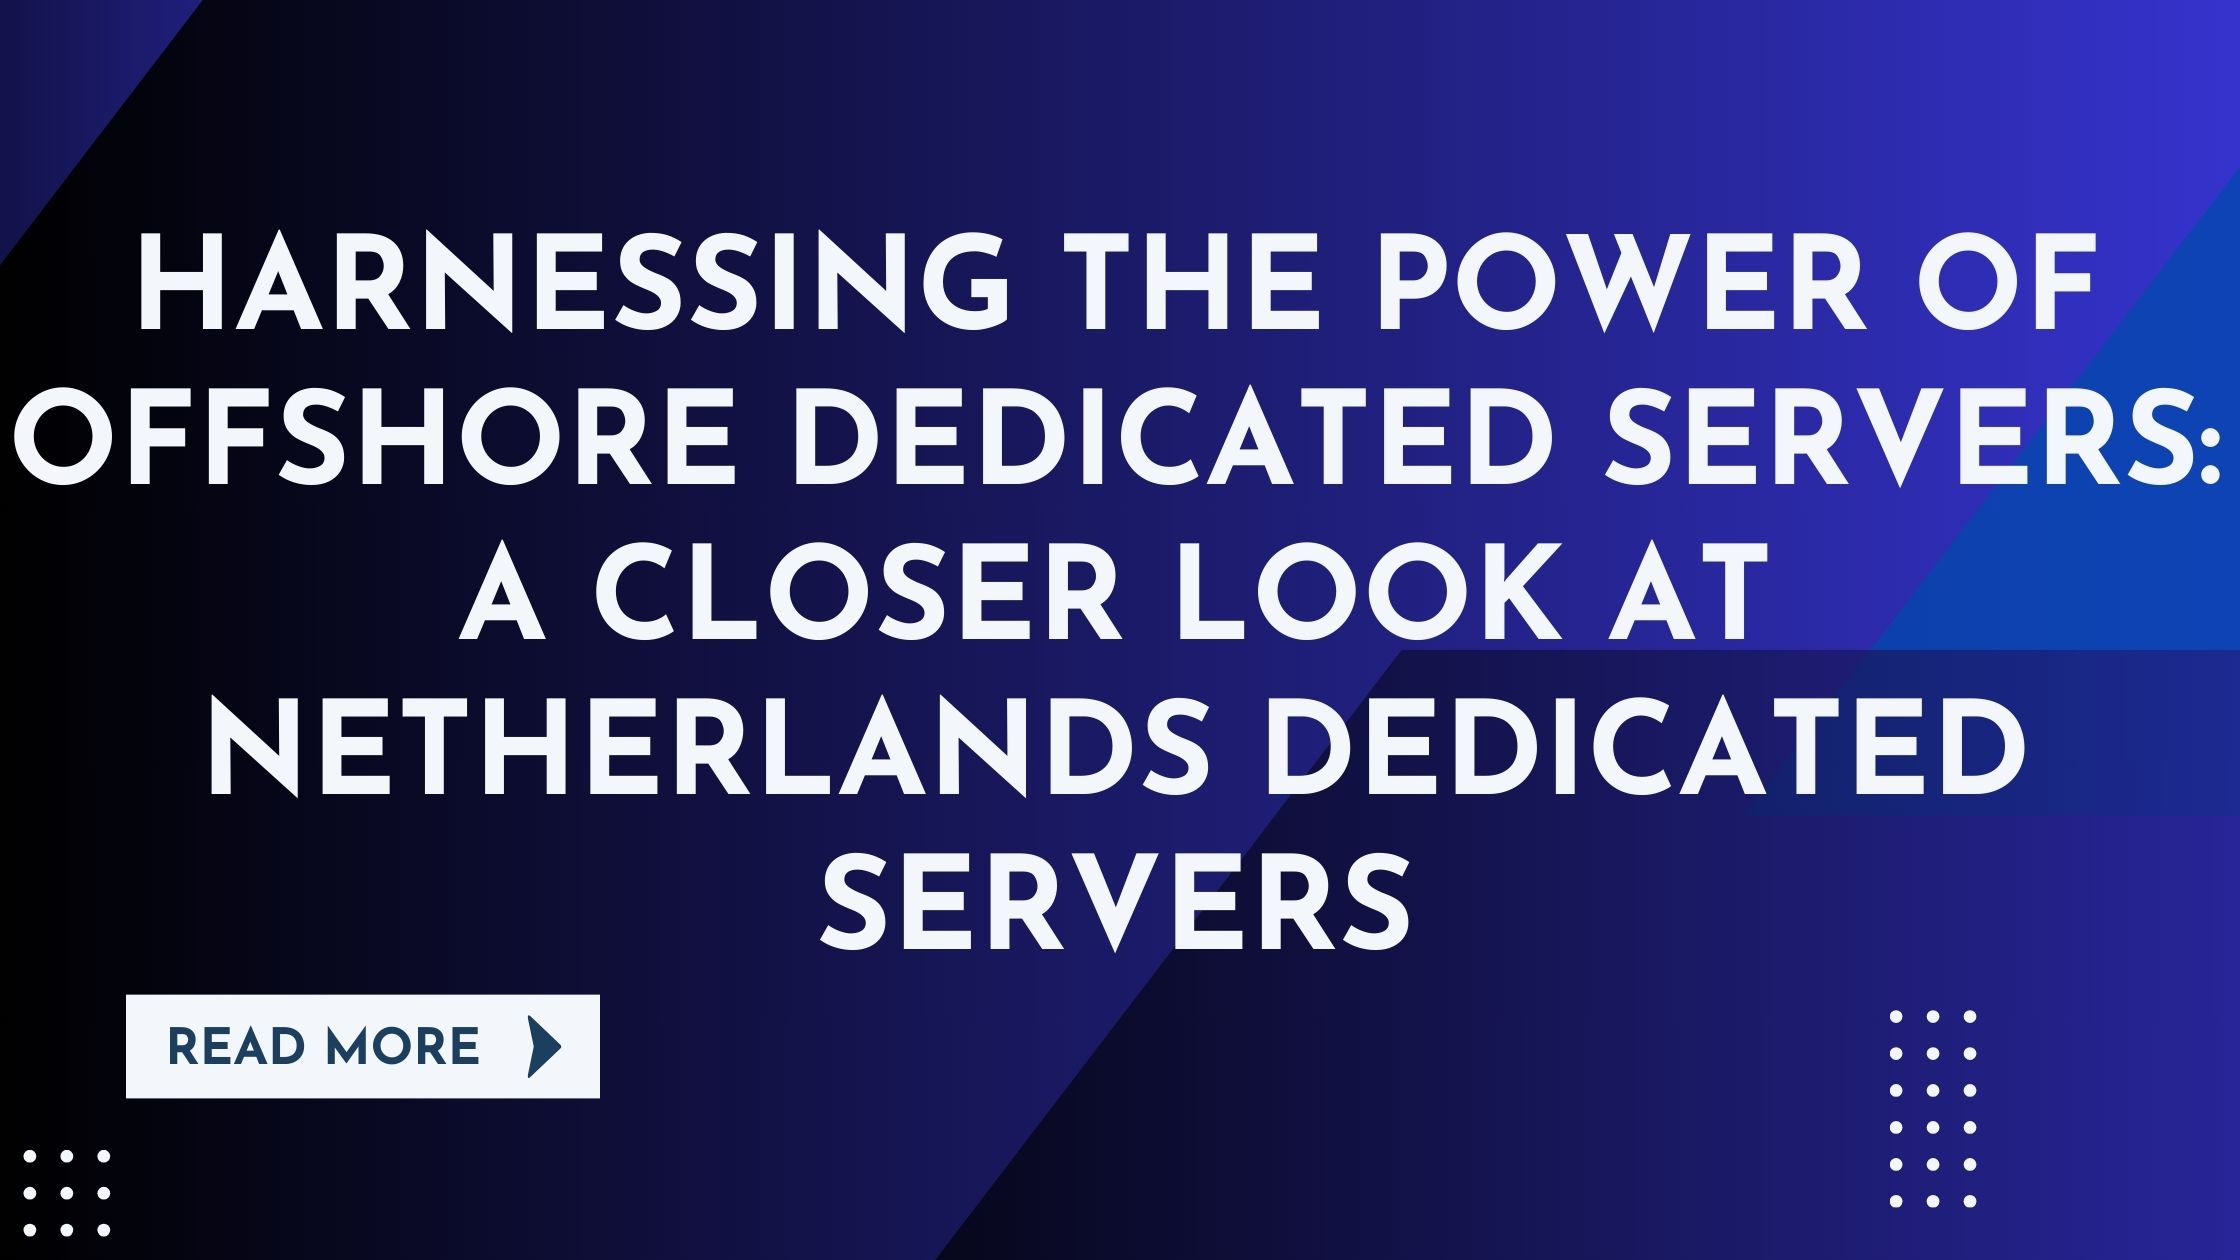 Harnessing the Power of Offshore Dedicated Servers: A Closer Look at Netherlands Dedicated Servers